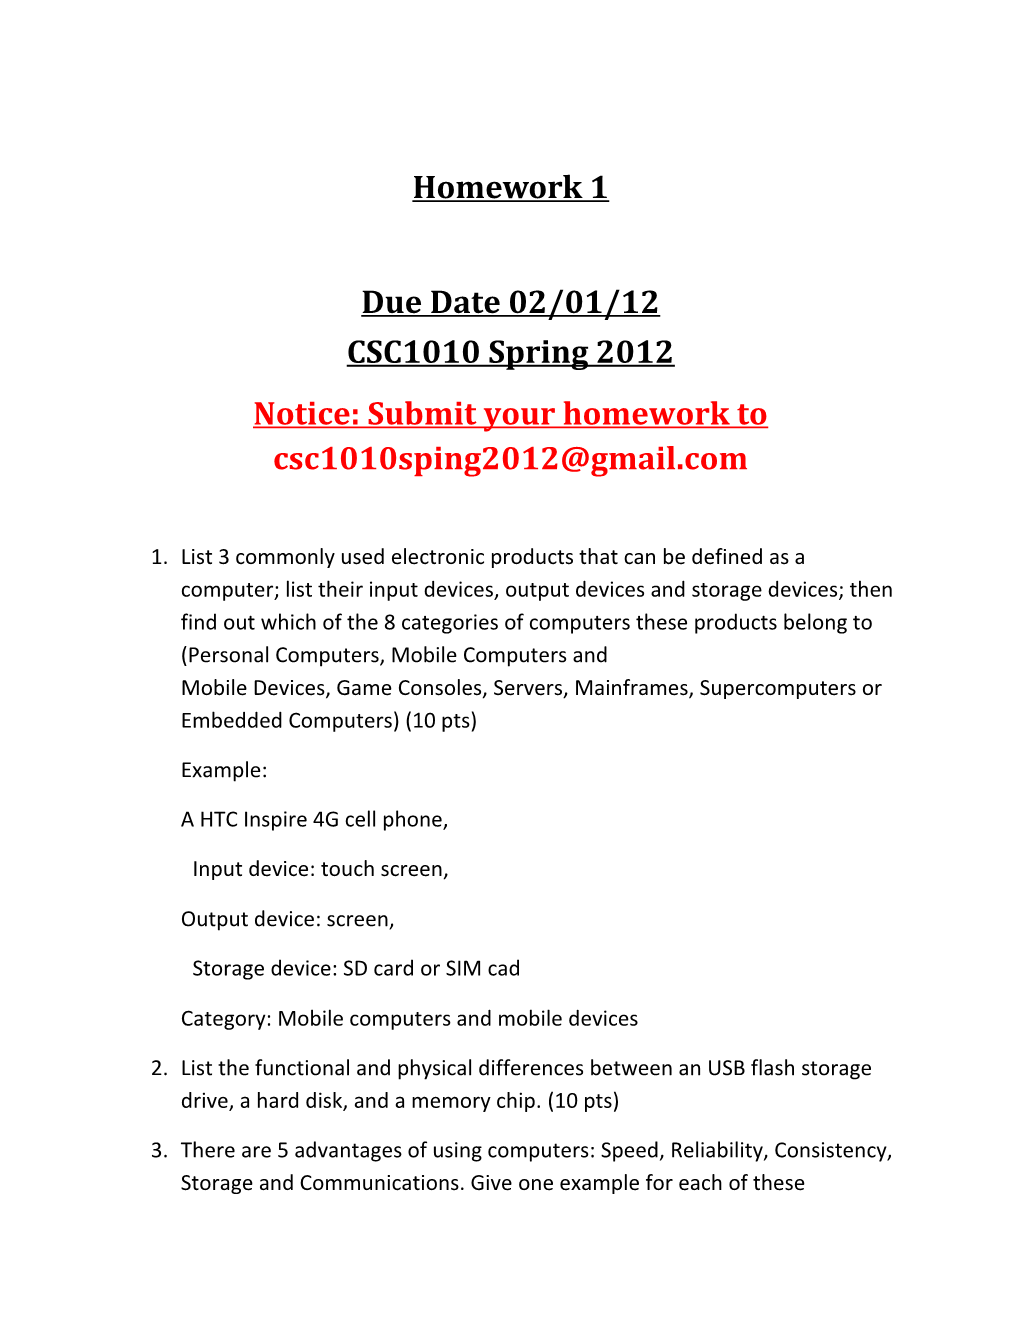 Notice: Submit Your Homework To